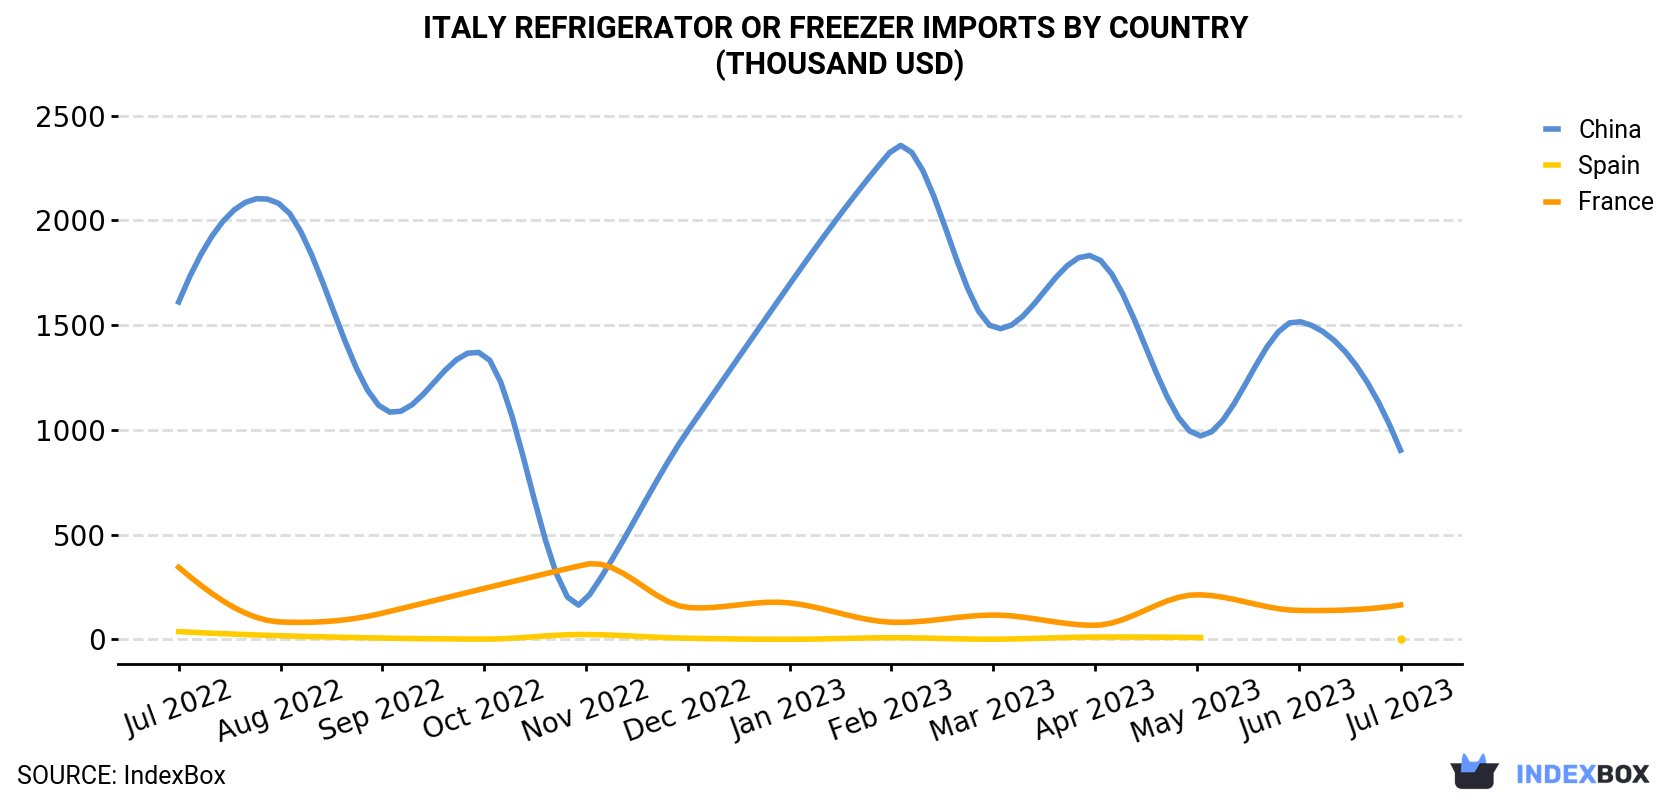 Italy Refrigerator Or Freezer Imports By Country (Thousand USD)